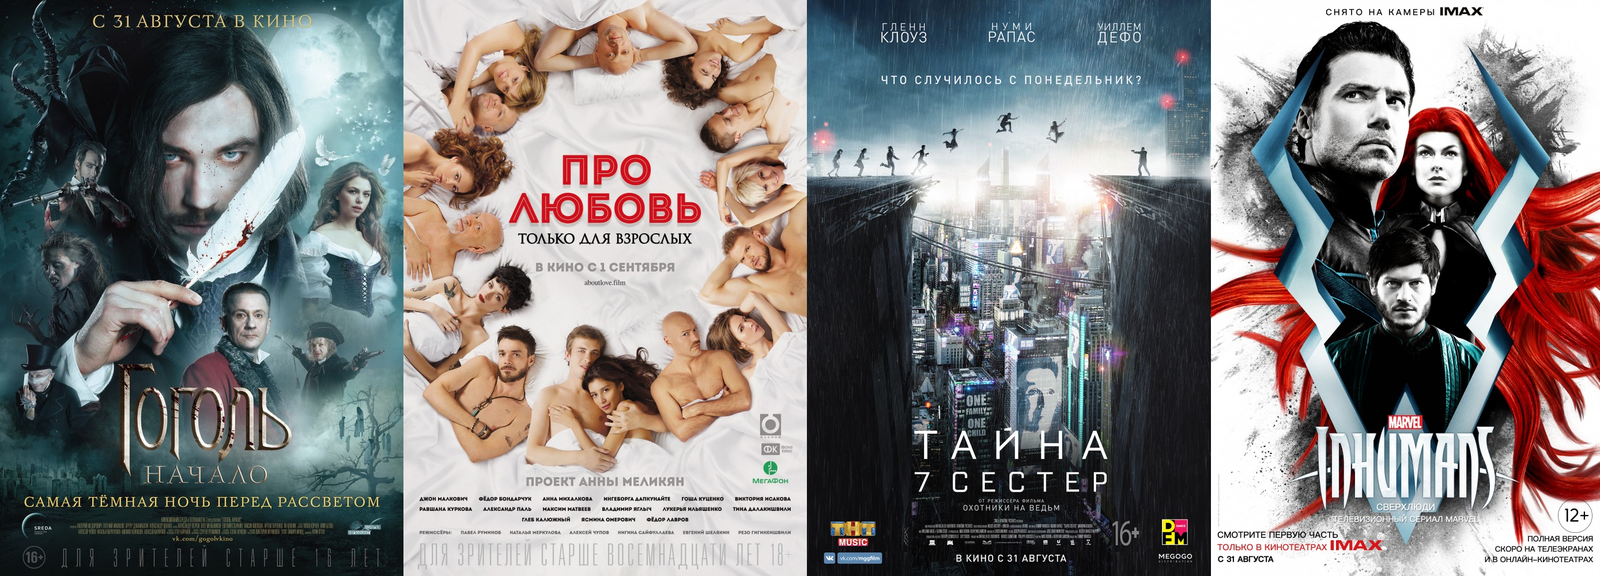 Russian box office receipts and distribution of screenings over the past weekend (August 31 - September 3) - Movies, Box office fees, Gogol Inception, Love, , Film distribution